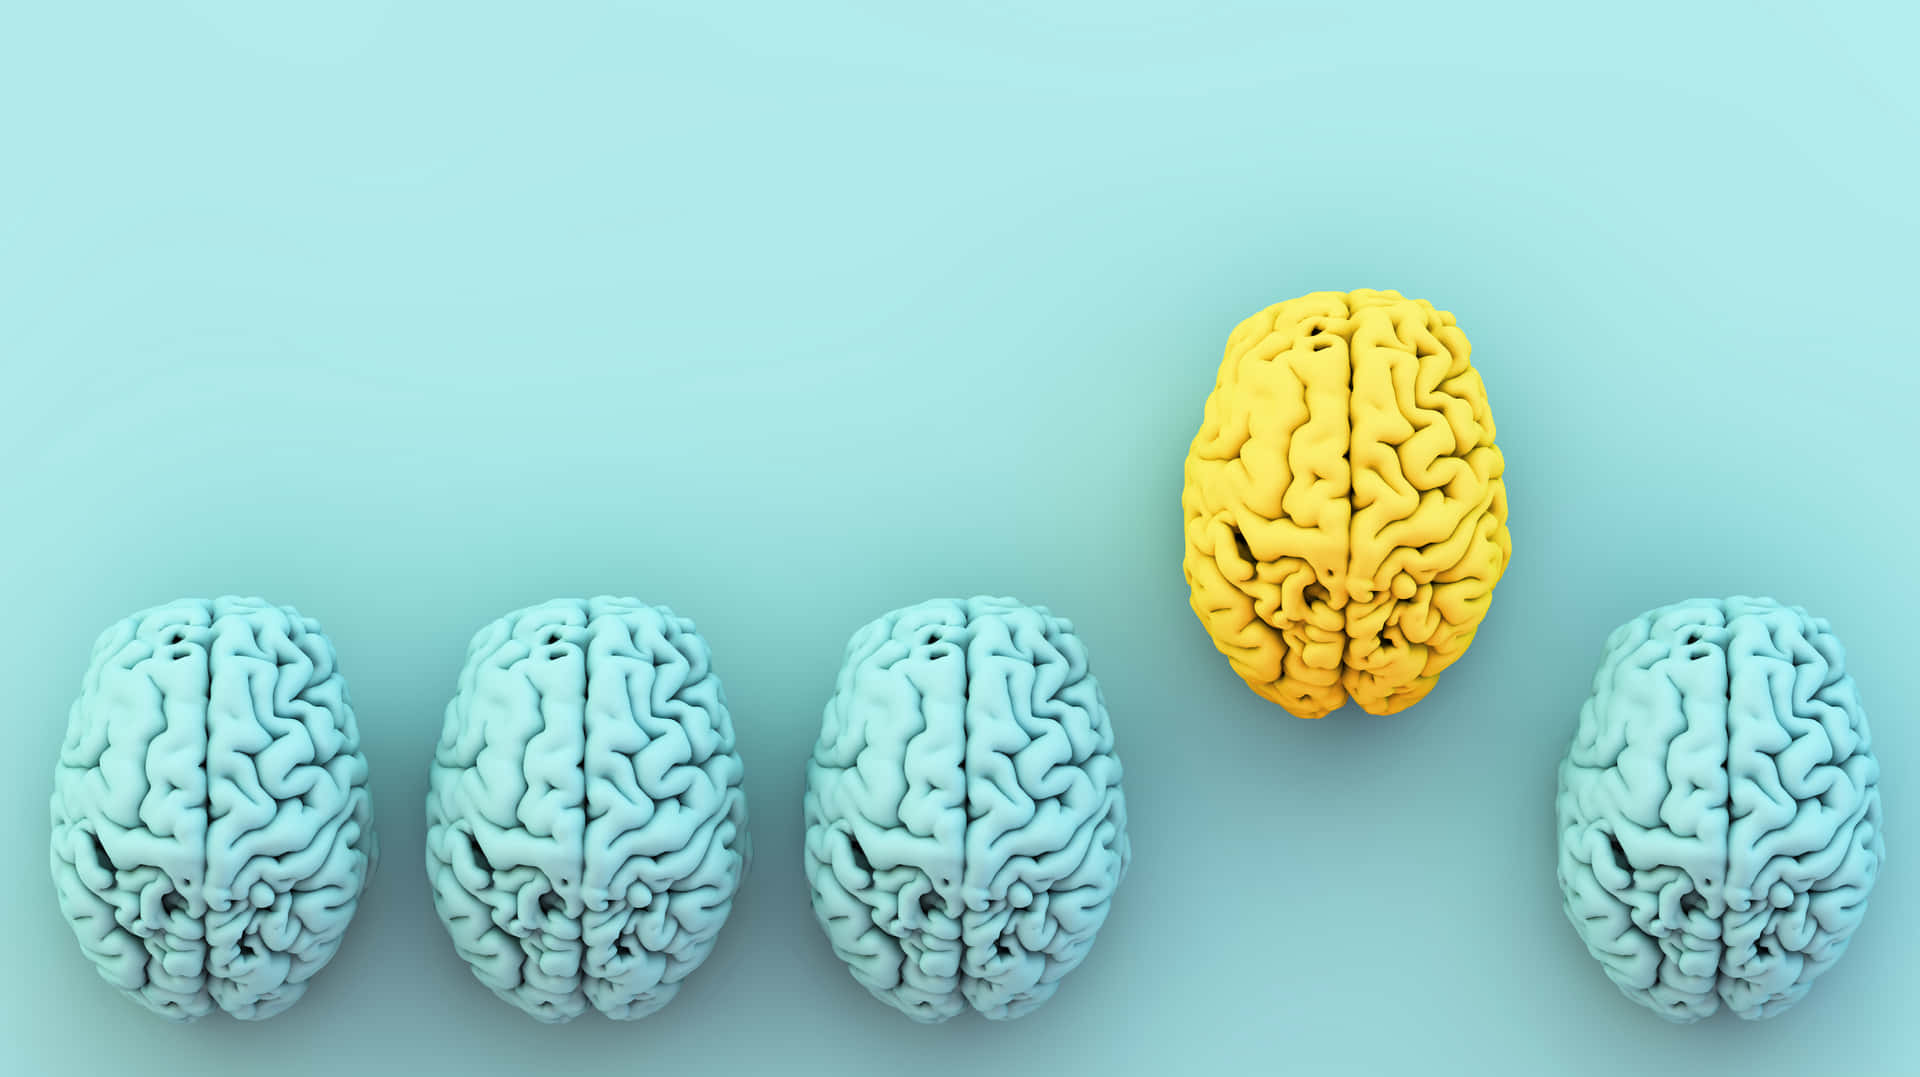 A Group Of Yellow And Blue Brains On A Blue Background